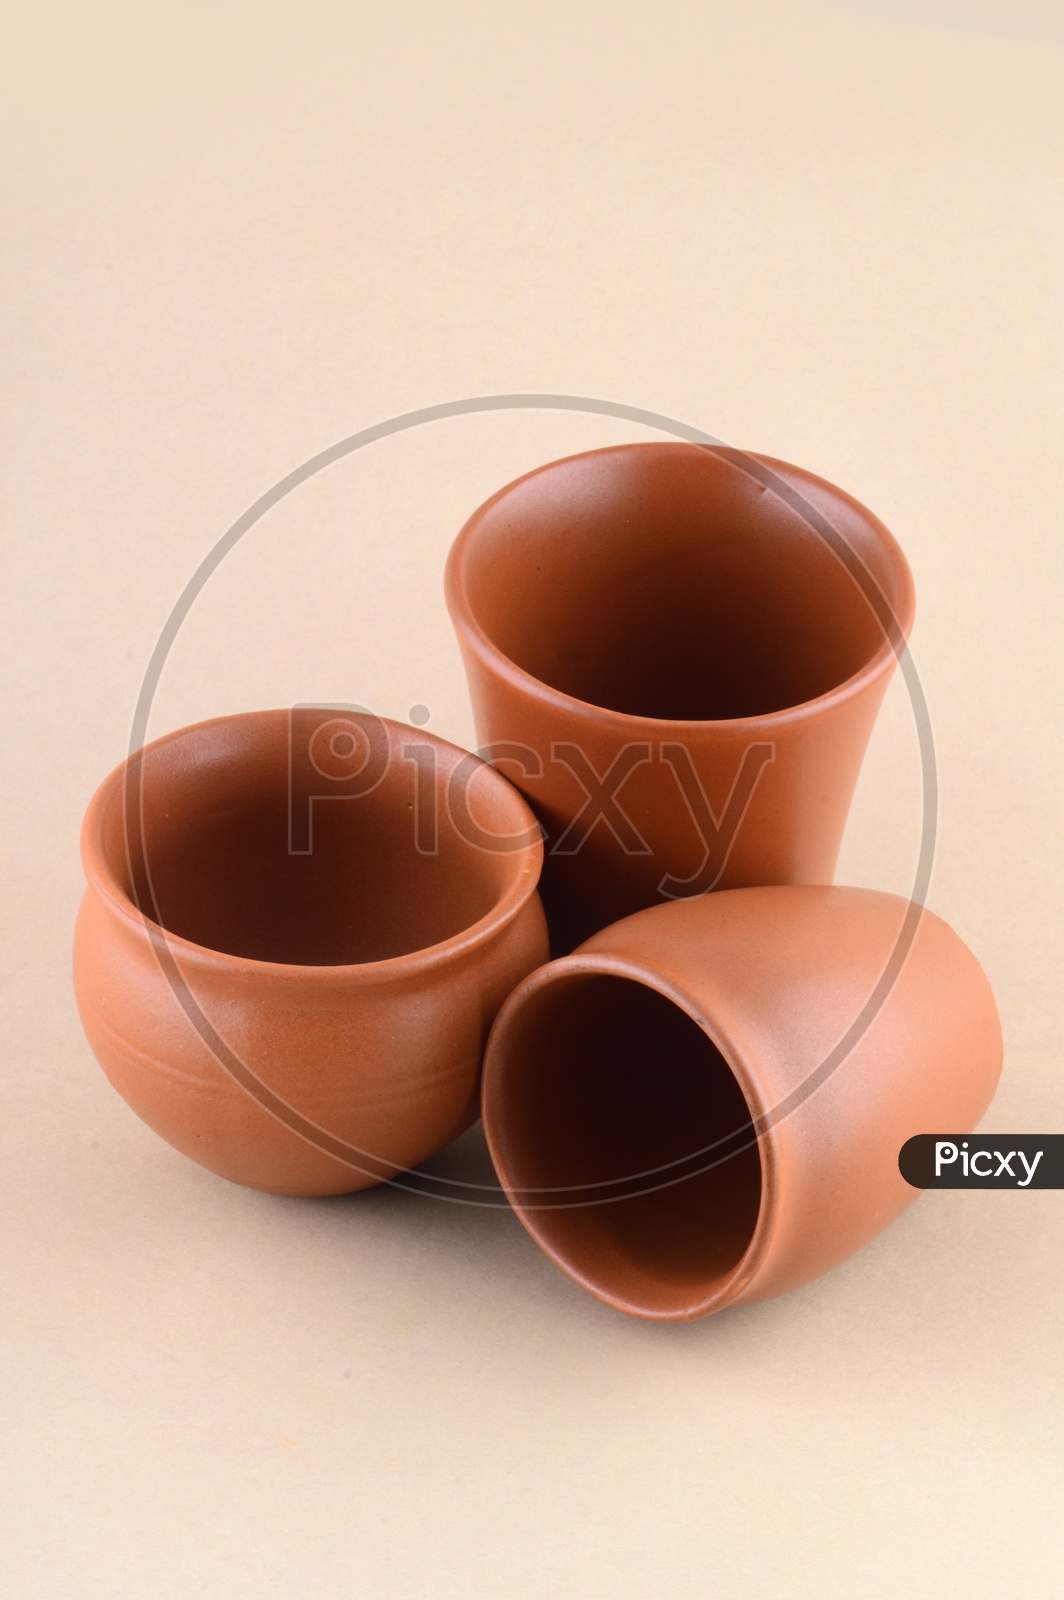 Clay Pots Or Clay Pottery Utensils For House Usage on an Isolated Background